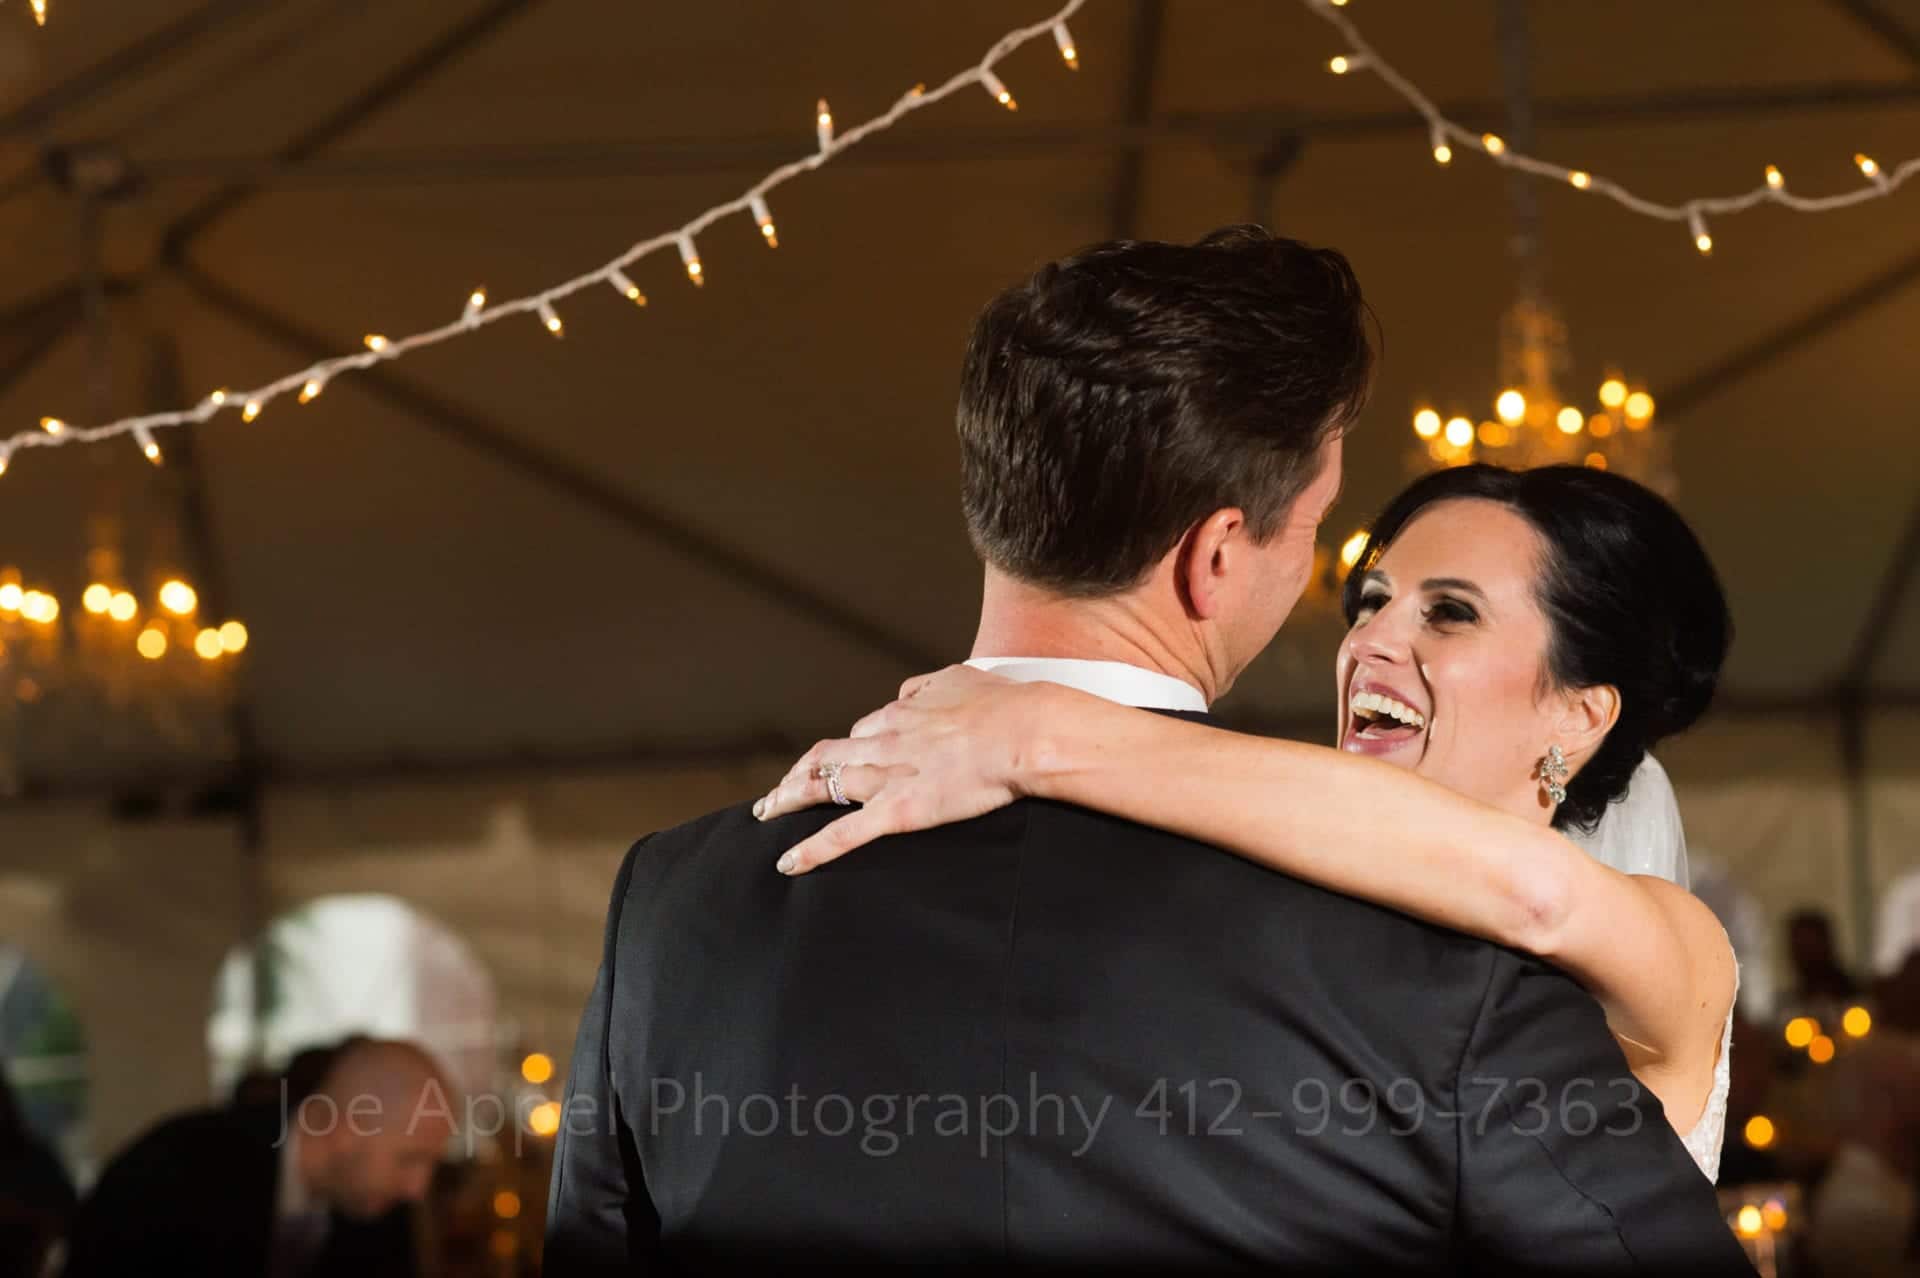 A bride smiles broadly at her groom as they dance. Her arm is around his neck.